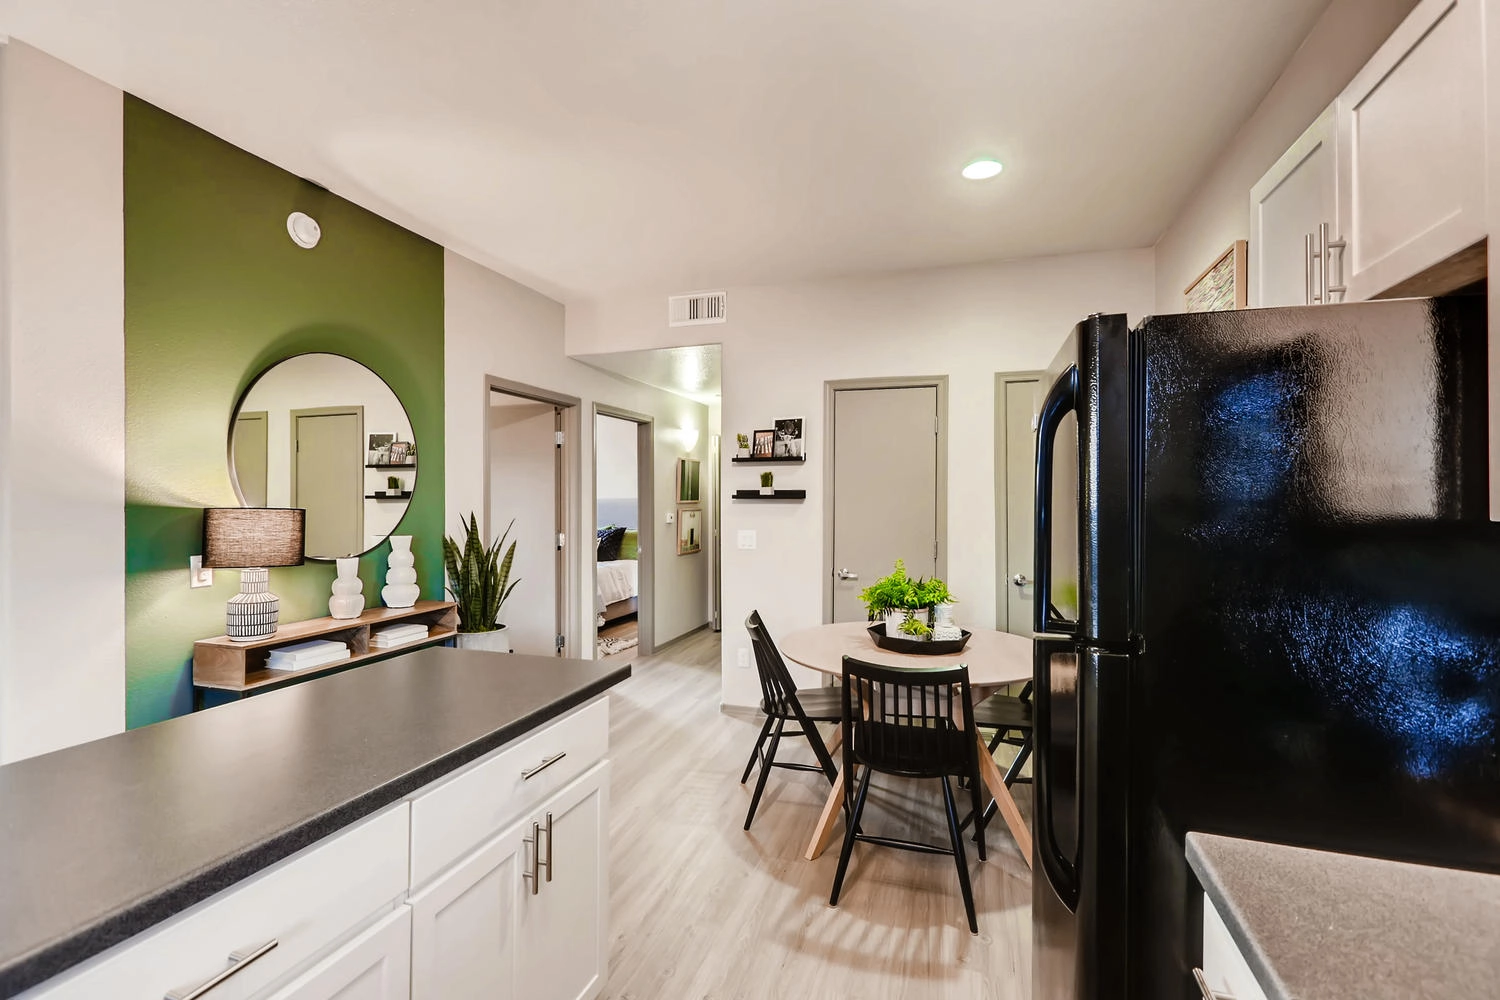 Kitchen with black counters and black appliances